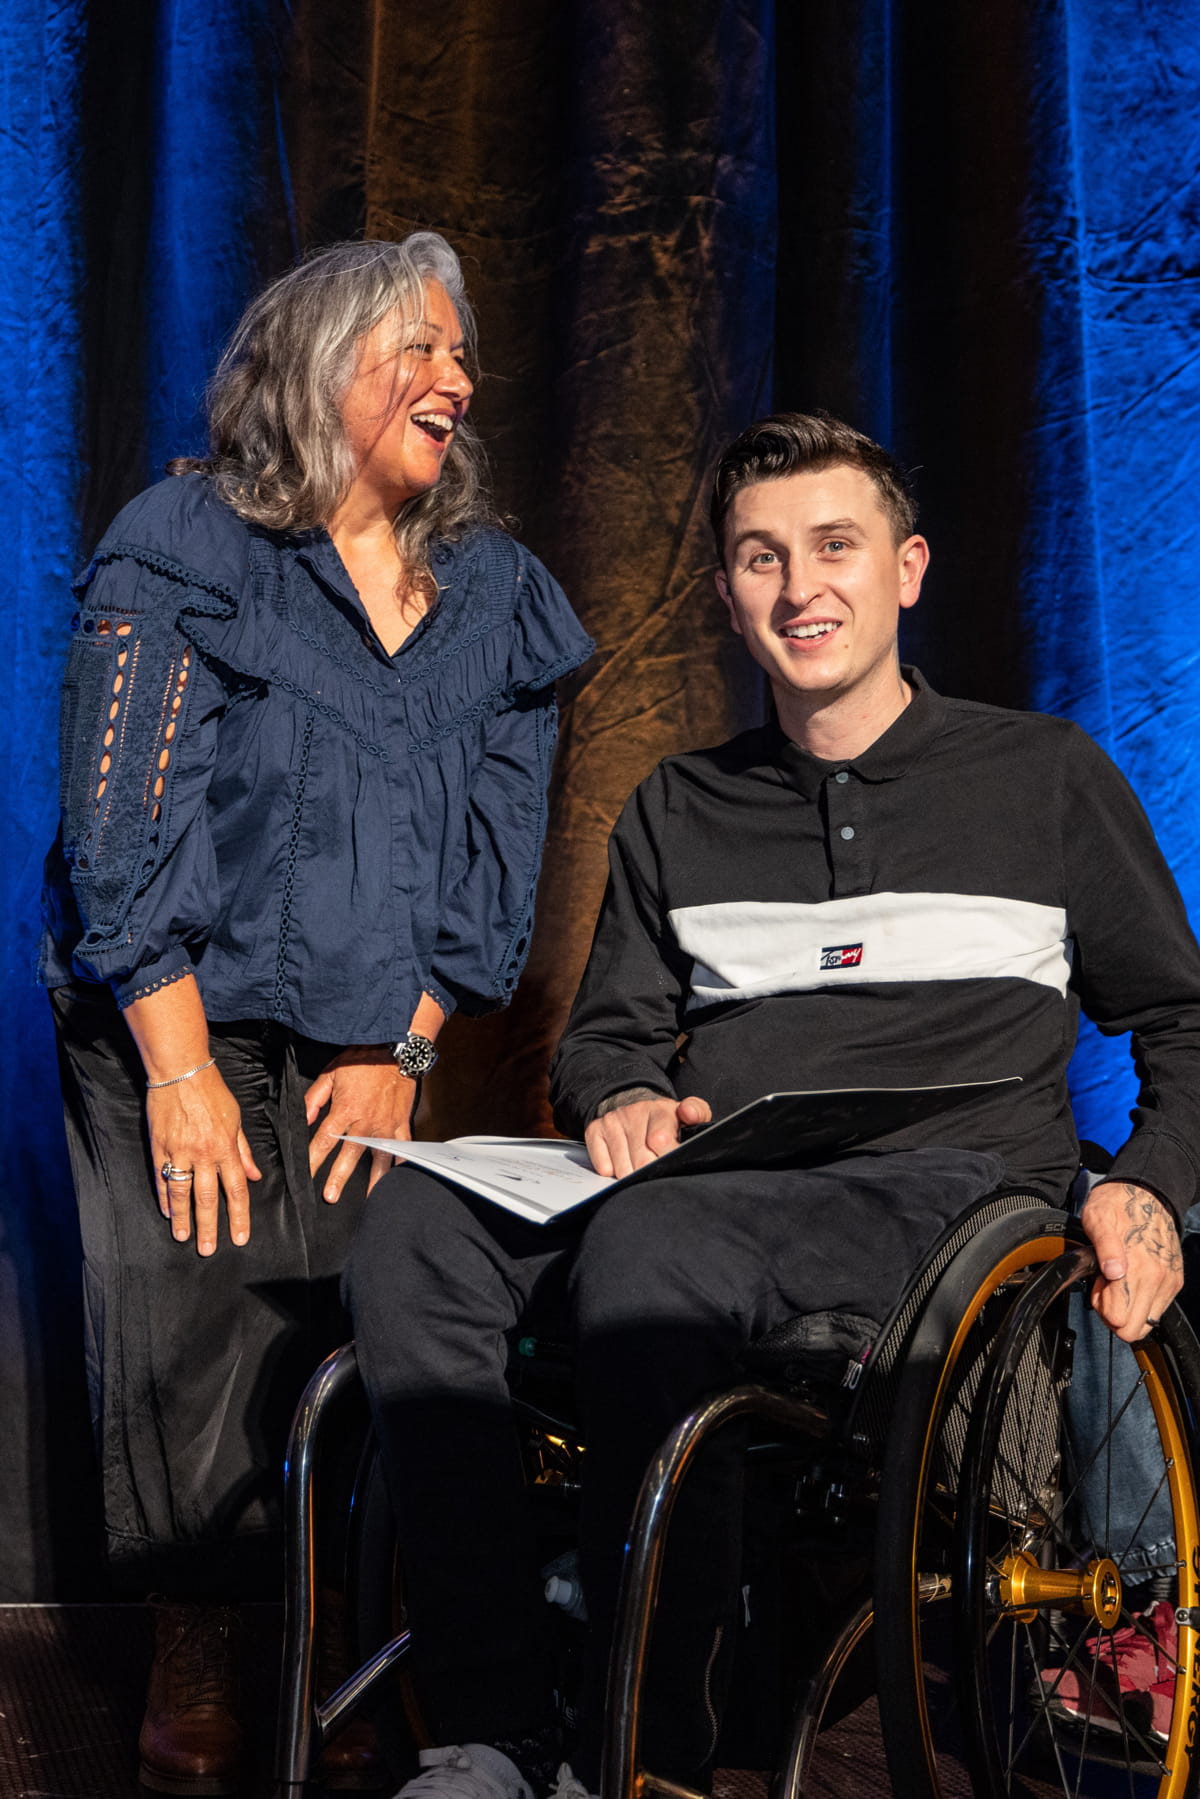 Cody Everson in wheelchair on stage with pin and certificate beside Jana Rangooni who is laughing at something he said